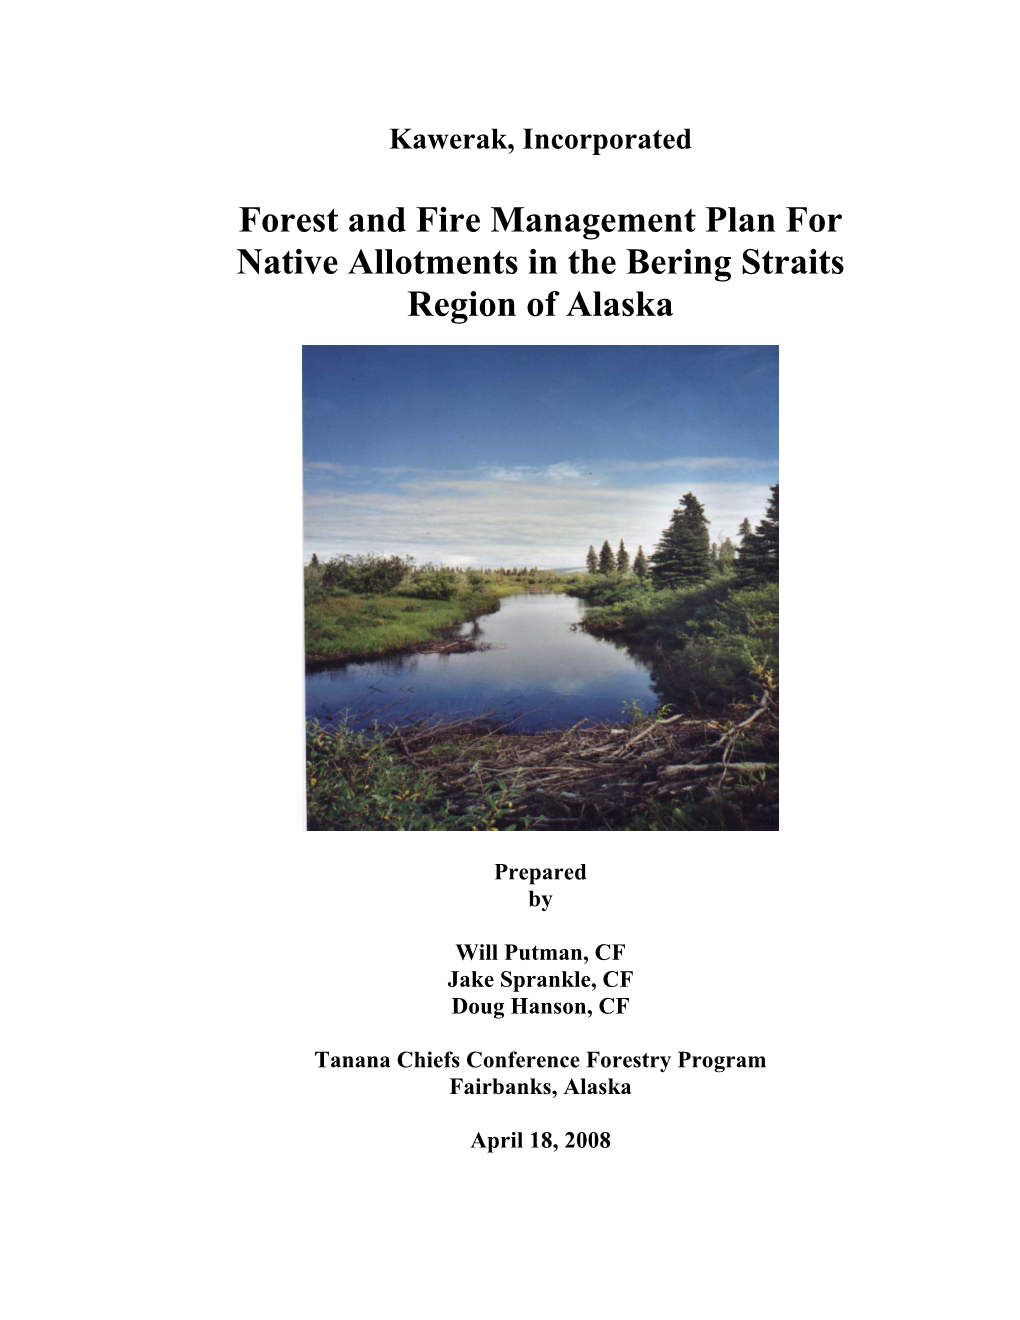 Forest and Fire Management Plan for Native Allotments in the Bering Straits Region of Alaska